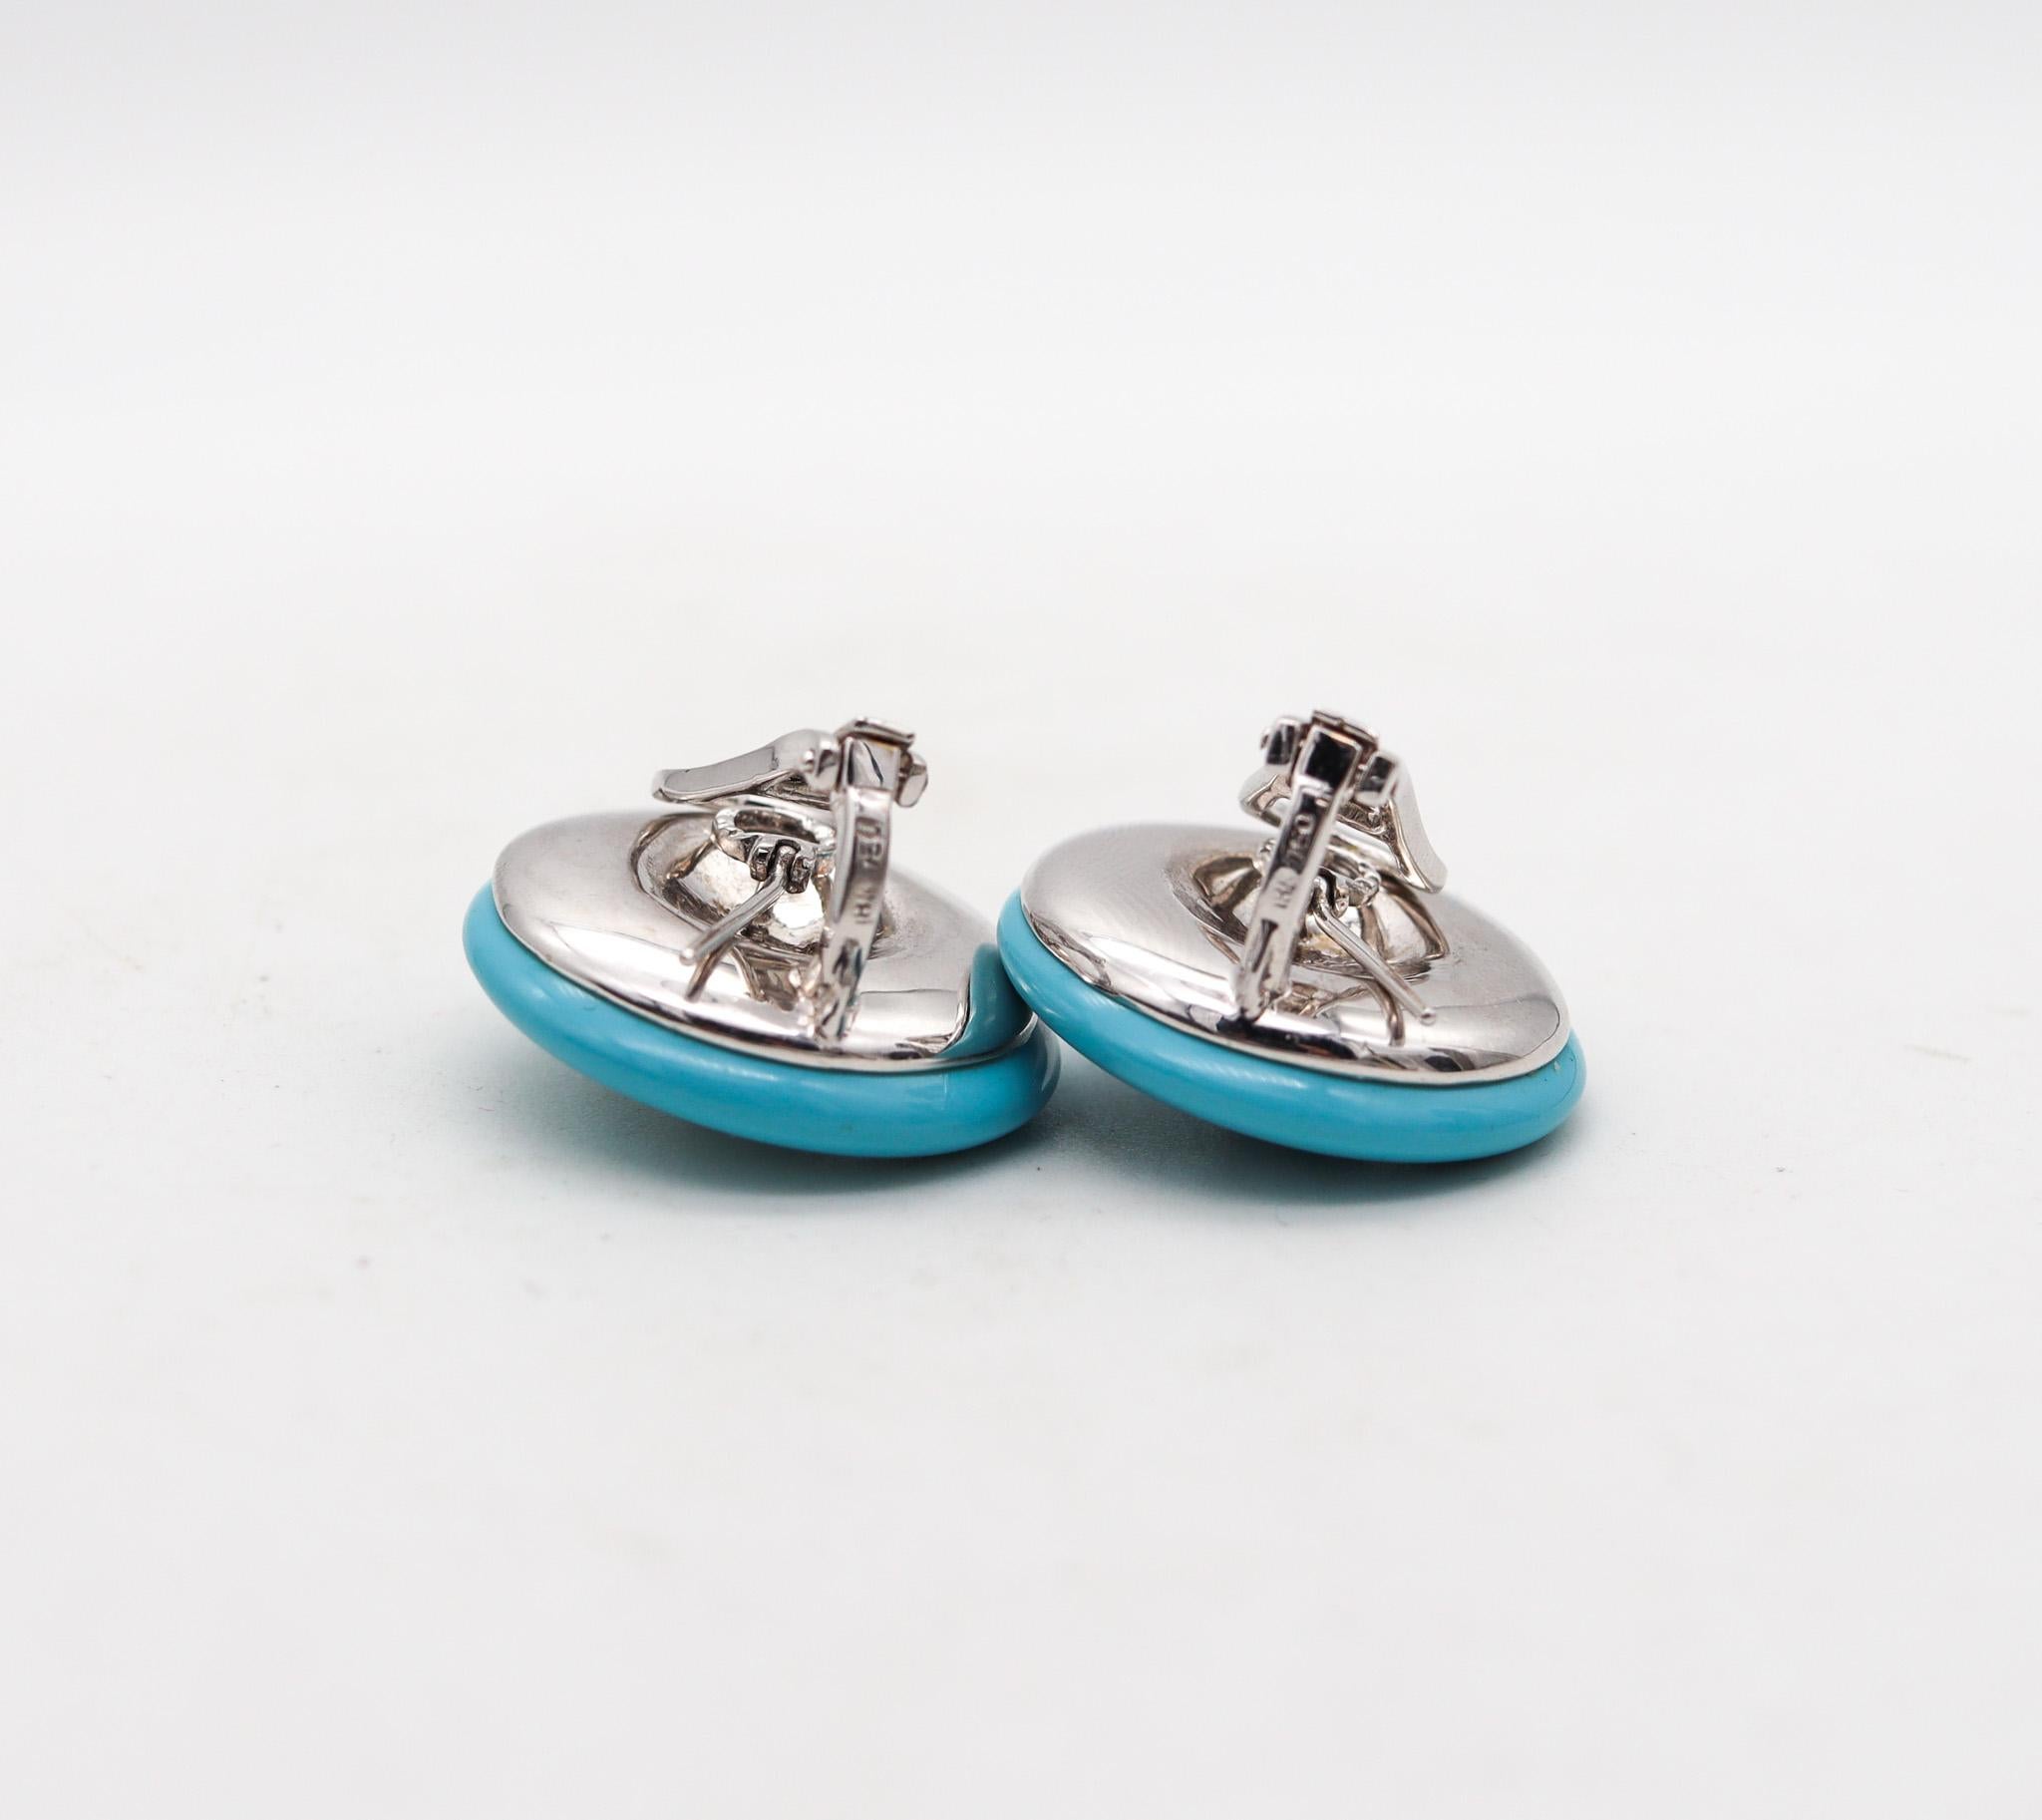 Women's Modernist Round Carved Turquoise Earrings In 18Kt White Gold With VS Diamonds For Sale